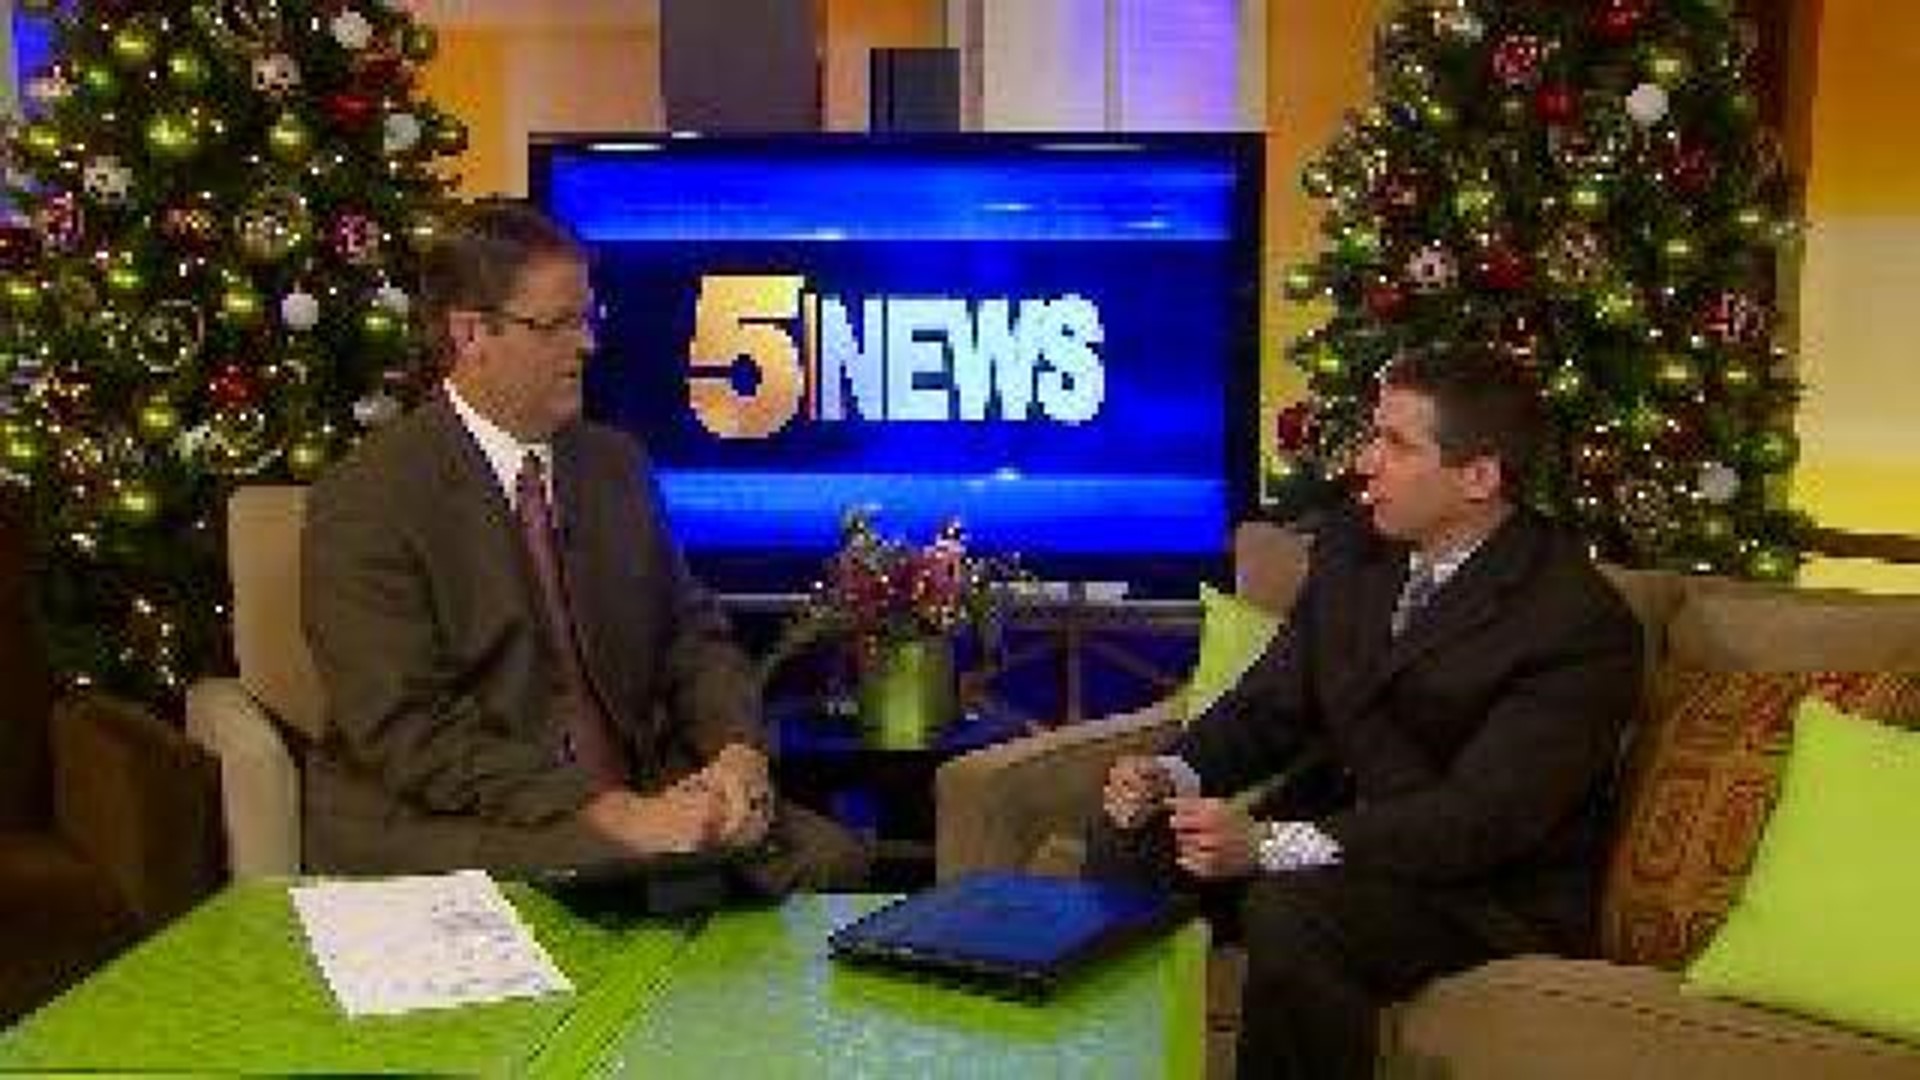 Fort Smith Convention Center on 5NEWS Weekend